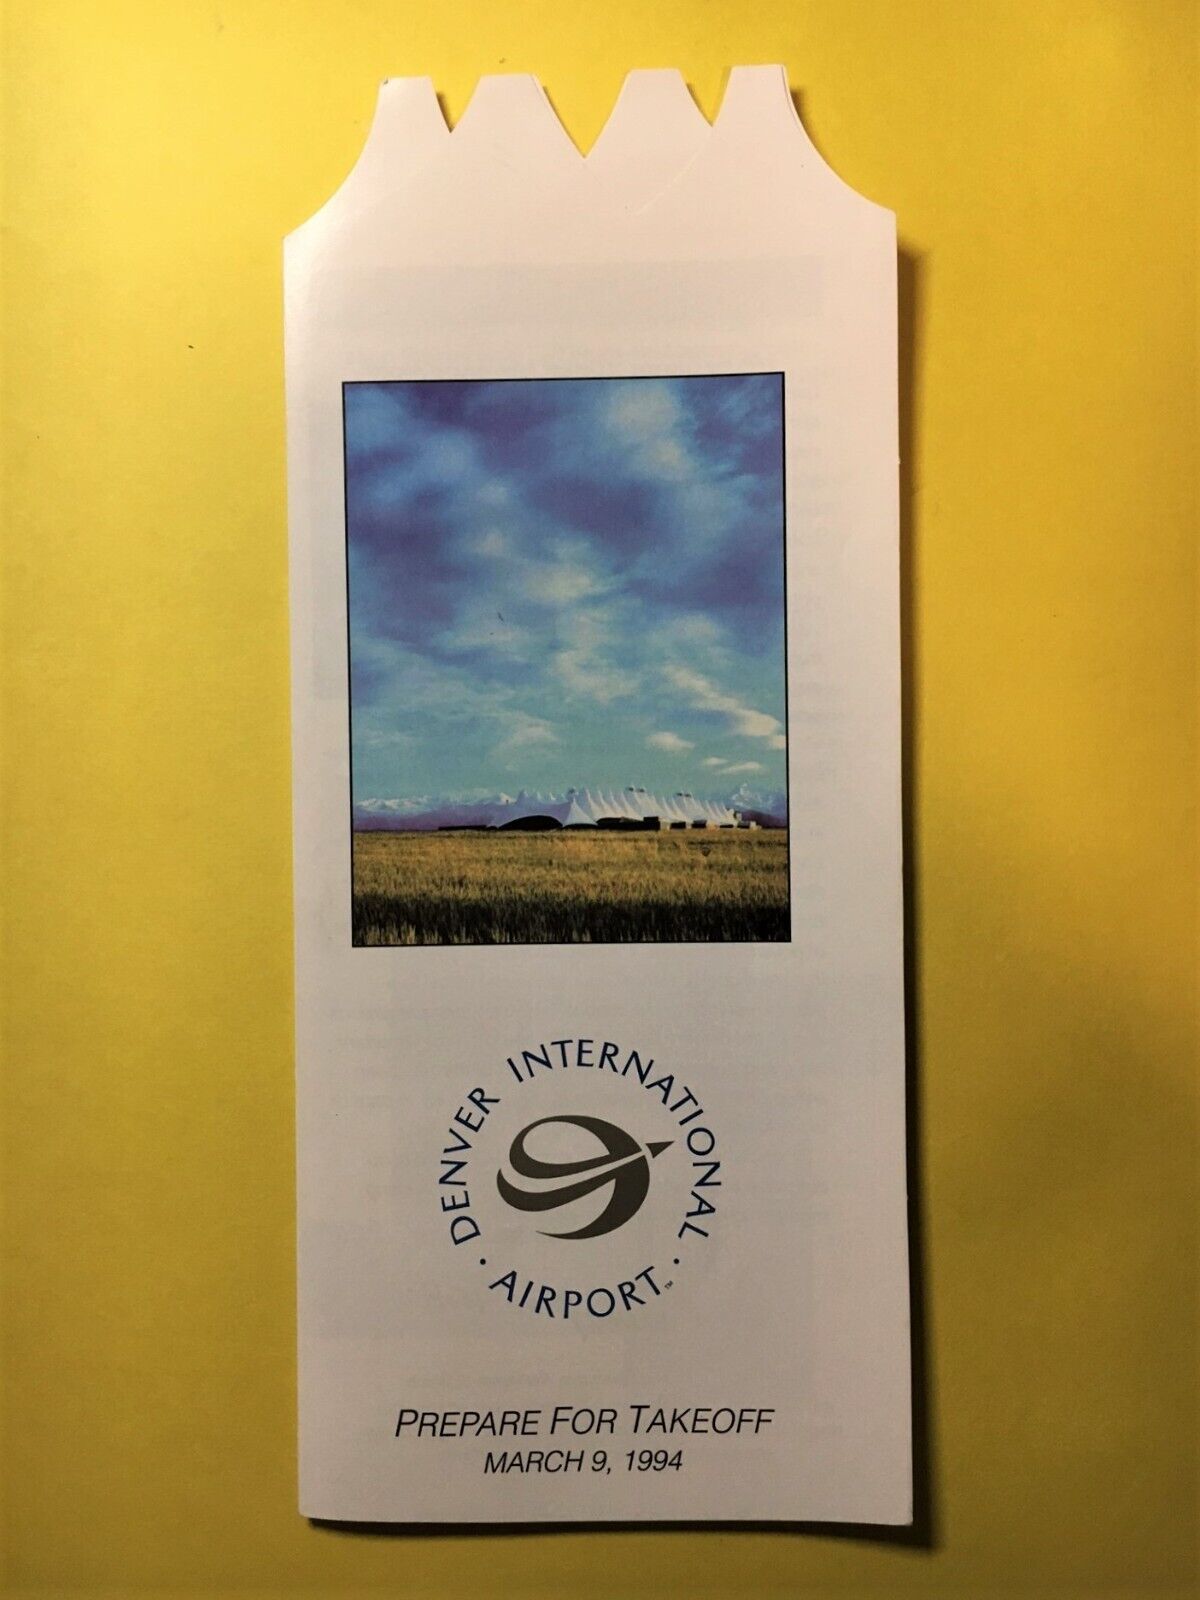 Denver Int'l Airport Pamphlet dated March 9, 1994